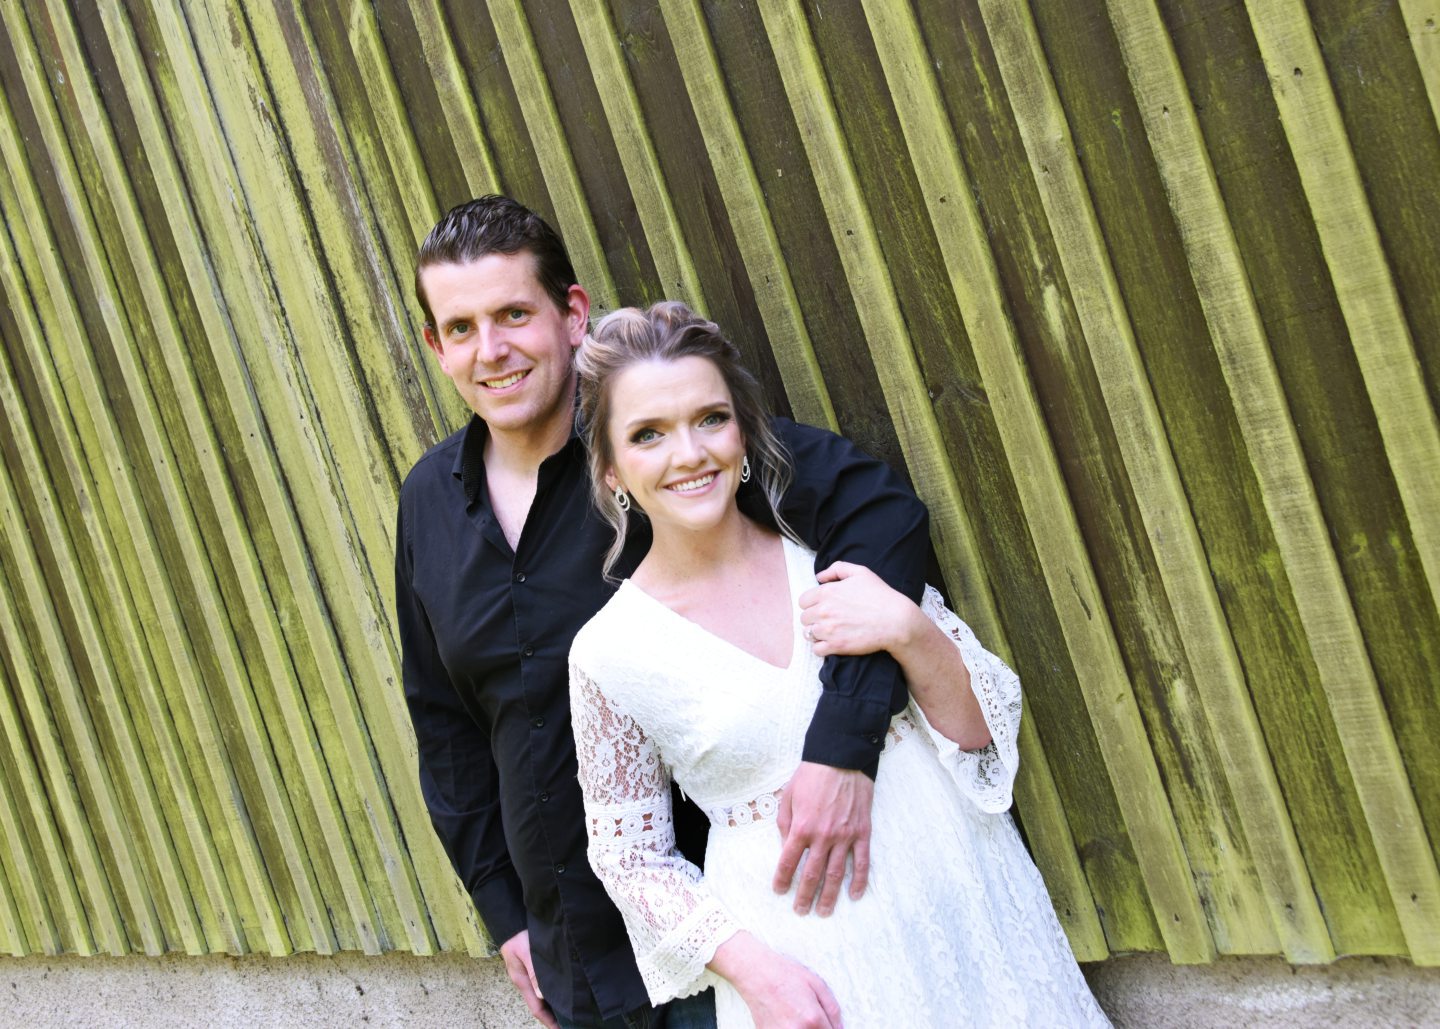 Photograph from Amy Finnie and Simon Allsop's engagement shoot, taken by Logan Sangster of Deeside Photographics.